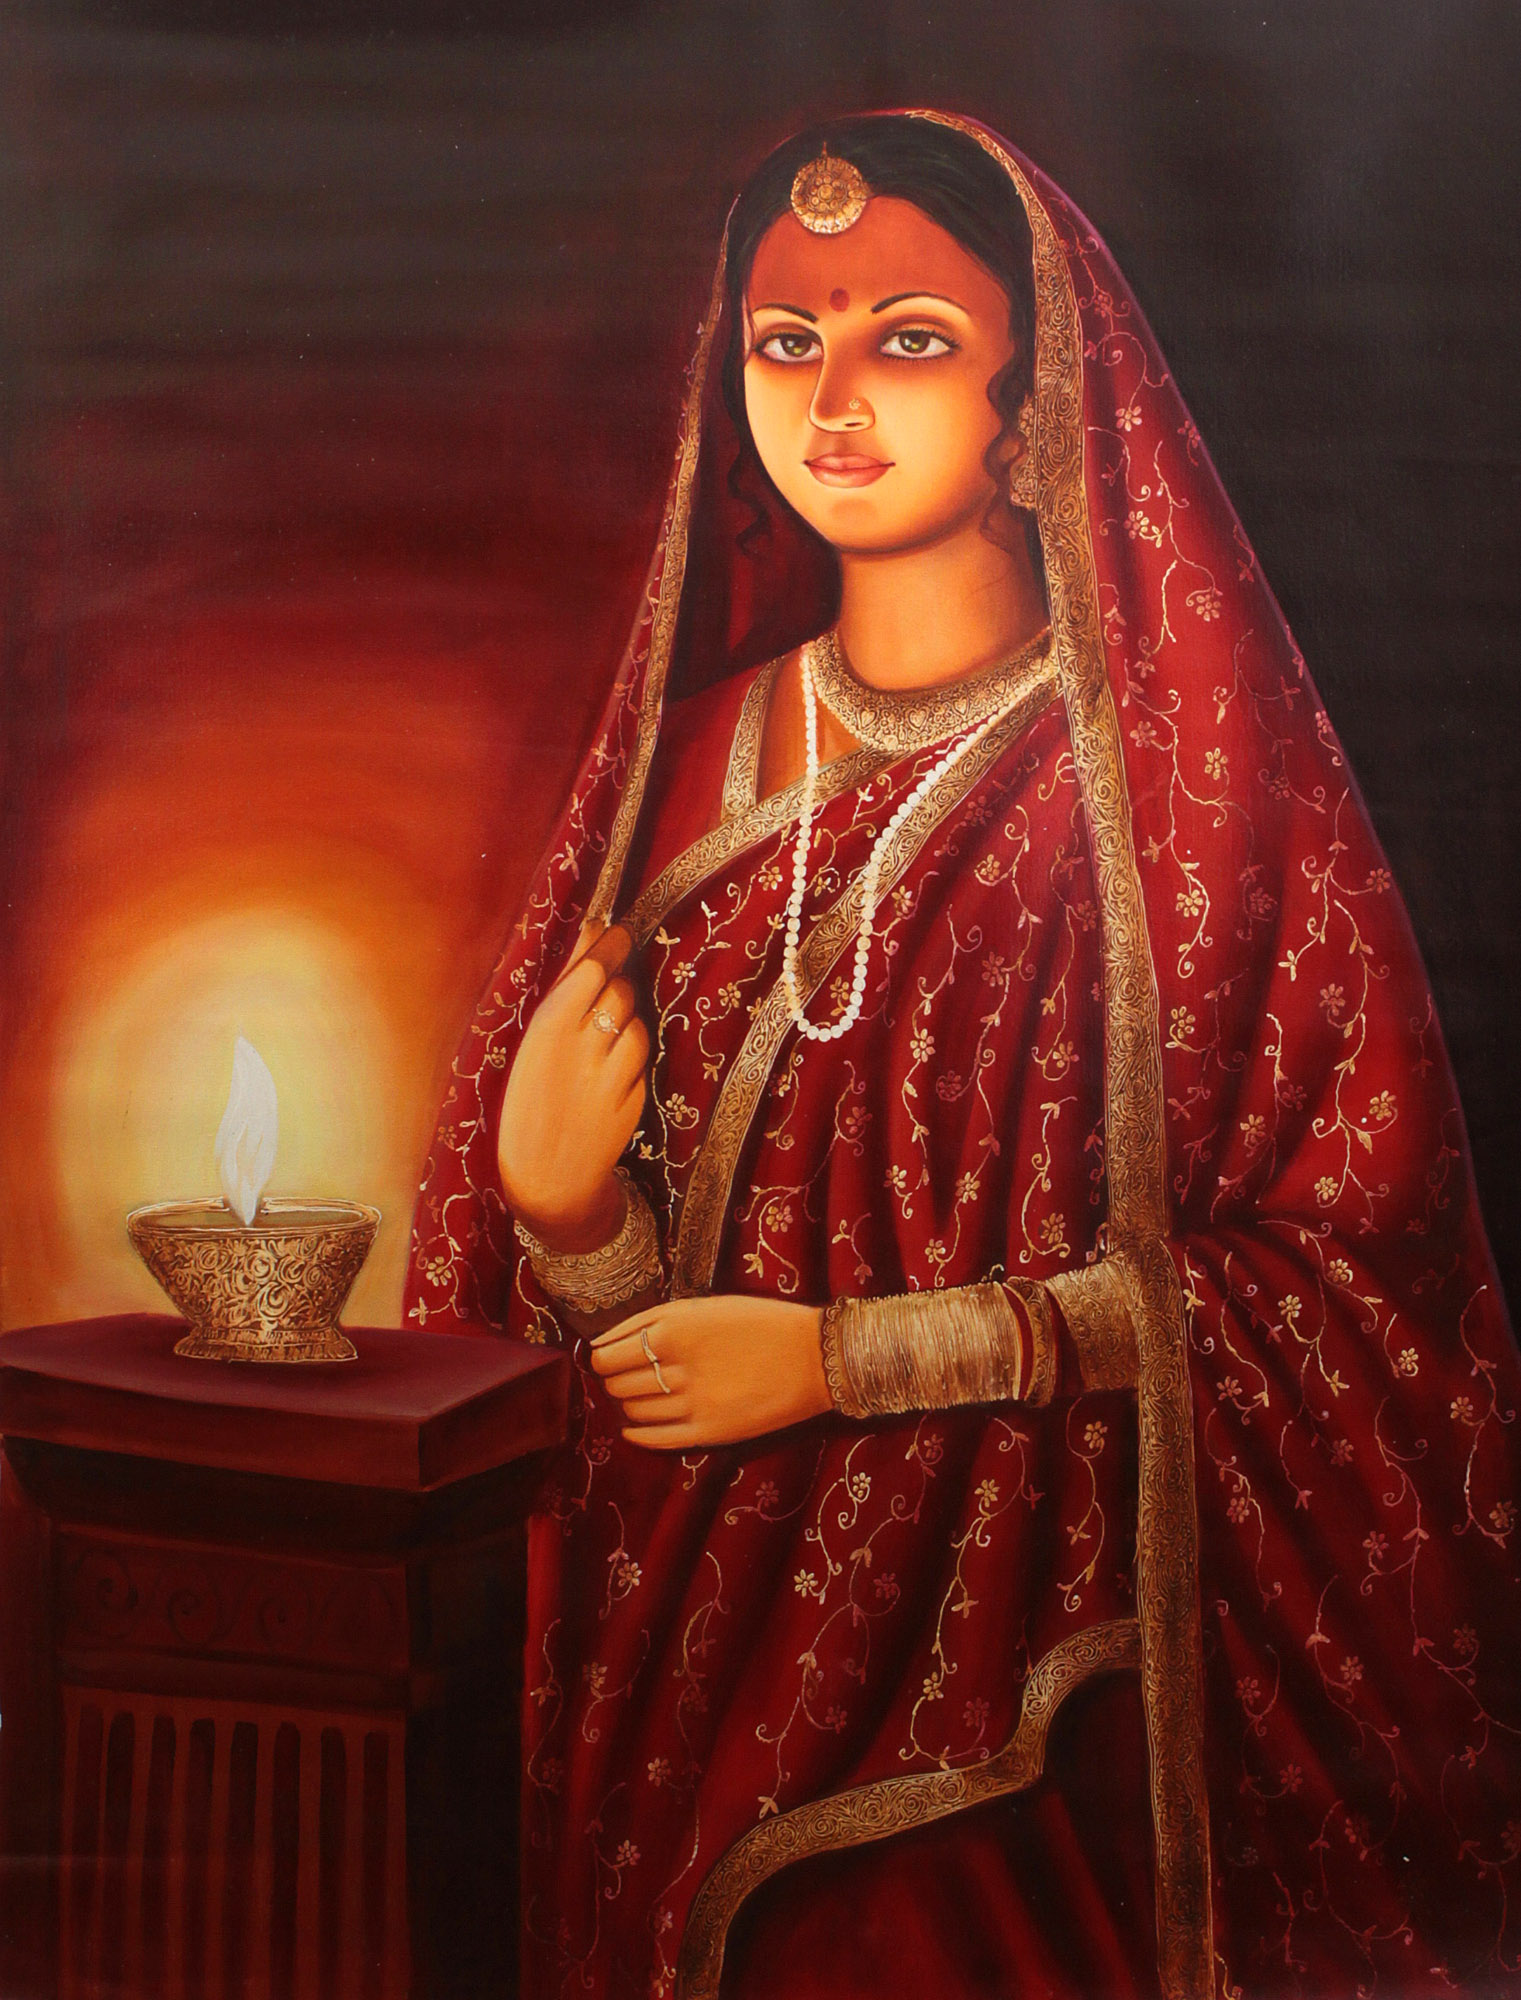 SPIRITUALITY SCIENCE - AHAM BRAHMASMI - UNITY VS IDENTITY : THIS ARTICLE IS DEDICATED TO THIS INDIAN LADY WHO SYMBOLIZES THE PRINCIPLE OF UNITY THAT APPEARS AS THE VERBAL SOUND OR SHABDA CALLED "ASMI" WHICH MEANS  ALWAYS PRESENT, OR EVER-EXISTING.